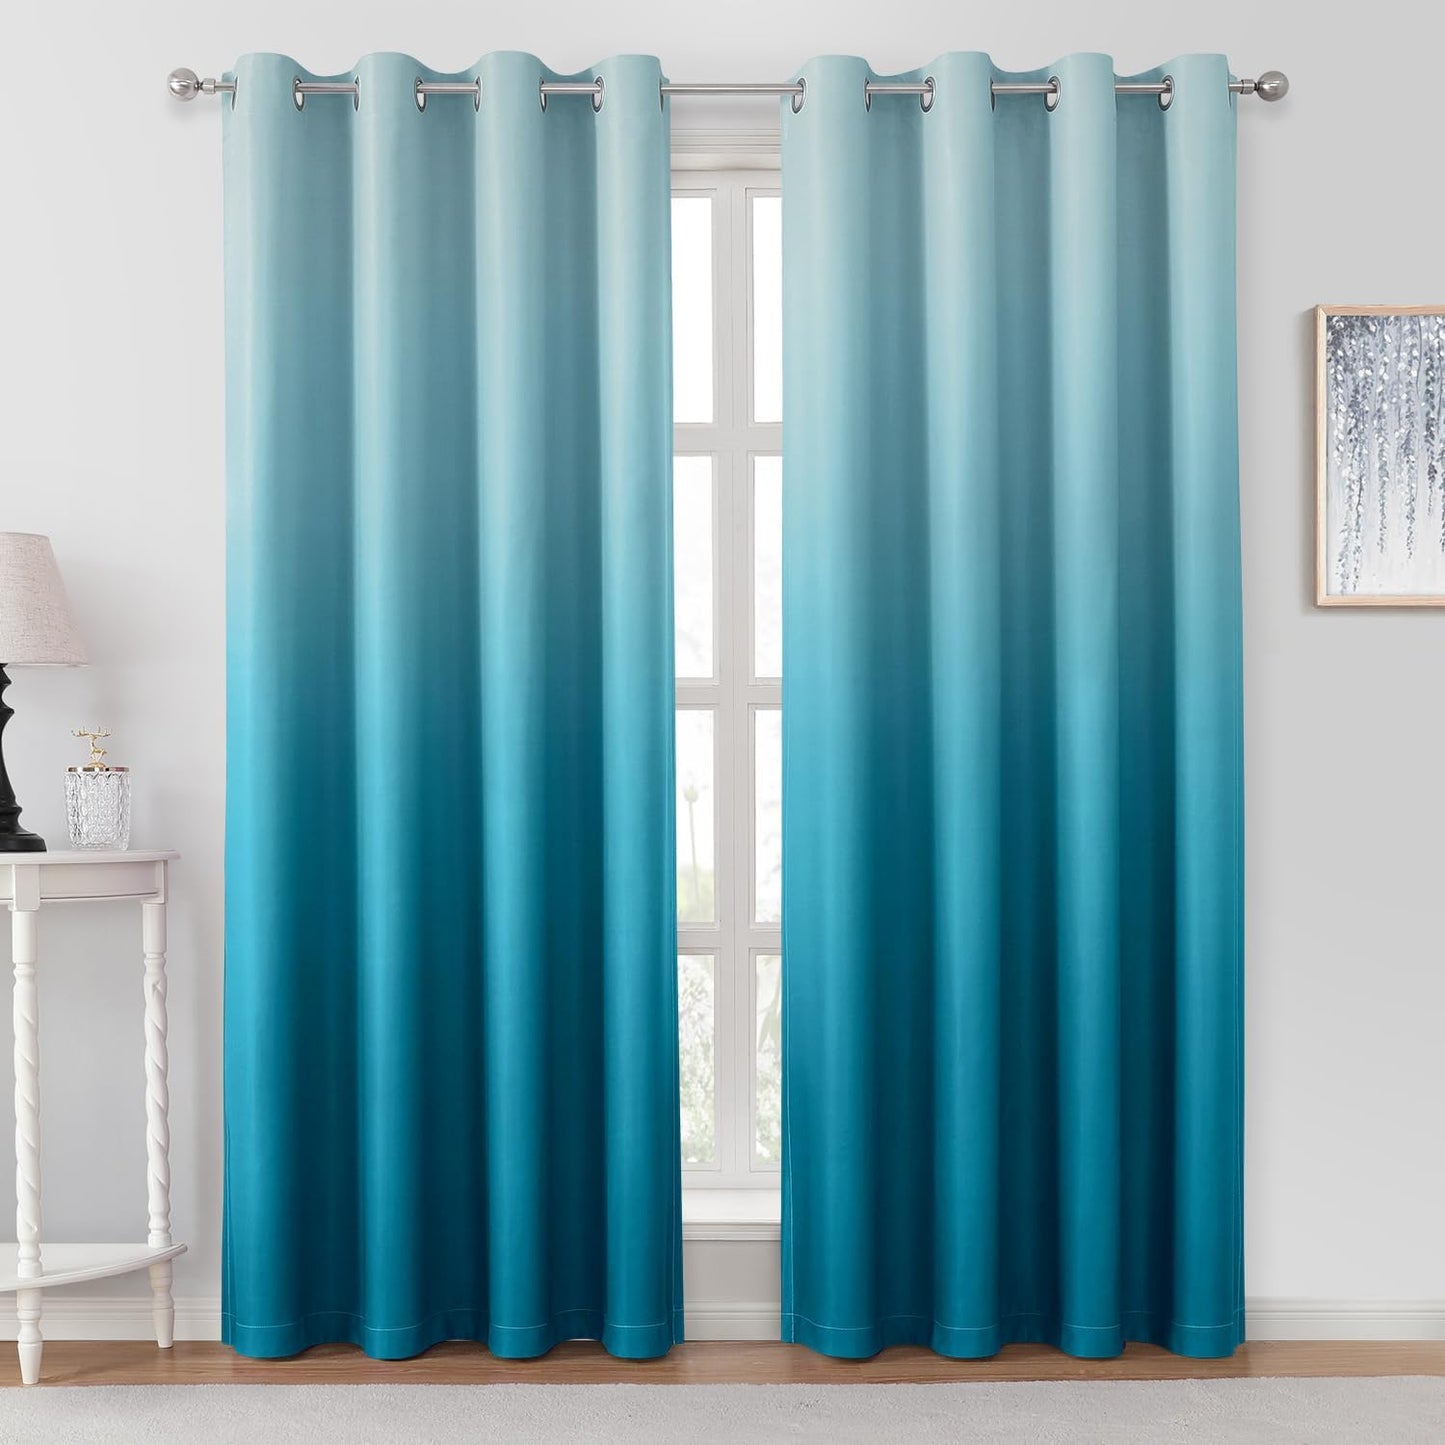 HOMEIDEAS Navy Blue Ombre Blackout Curtains 52 X 84 Inch Length Gradient Room Darkening Thermal Insulated Energy Saving Grommet 2 Panels Window Drapes for Living Room/Bedroom  HOMEIDEAS Turquoise 52"W X 96"L 